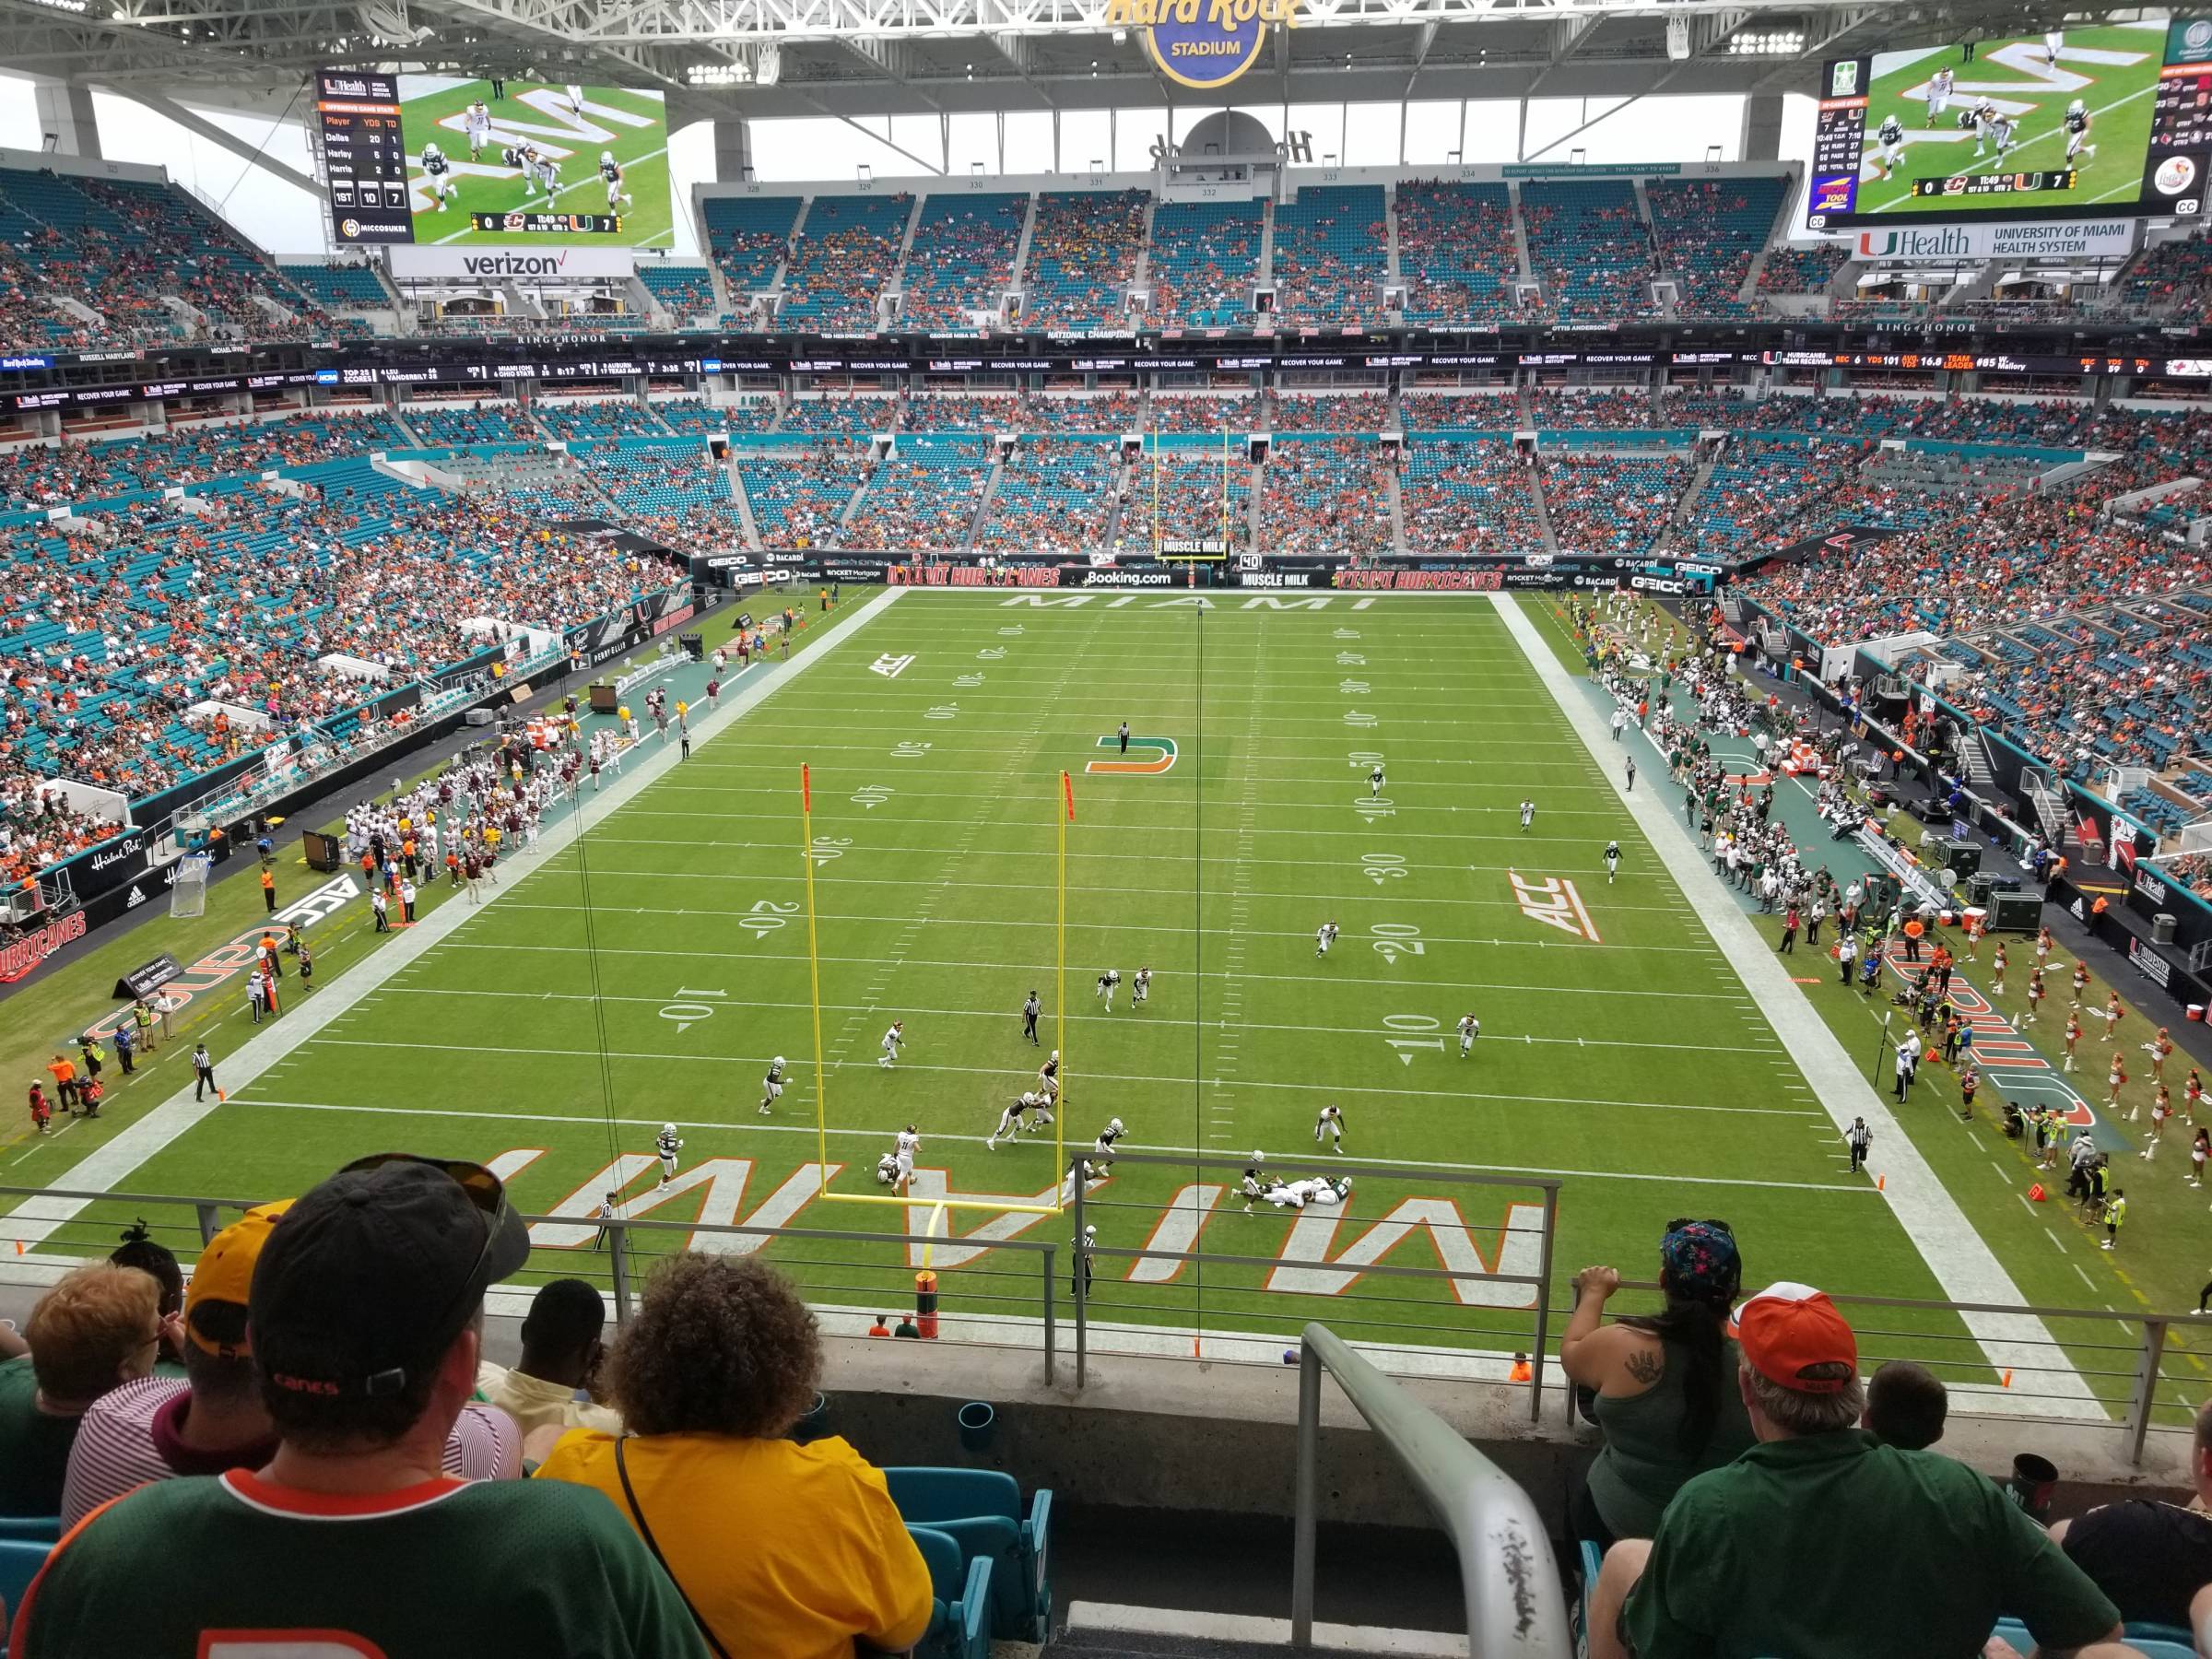 Seat view of section 304